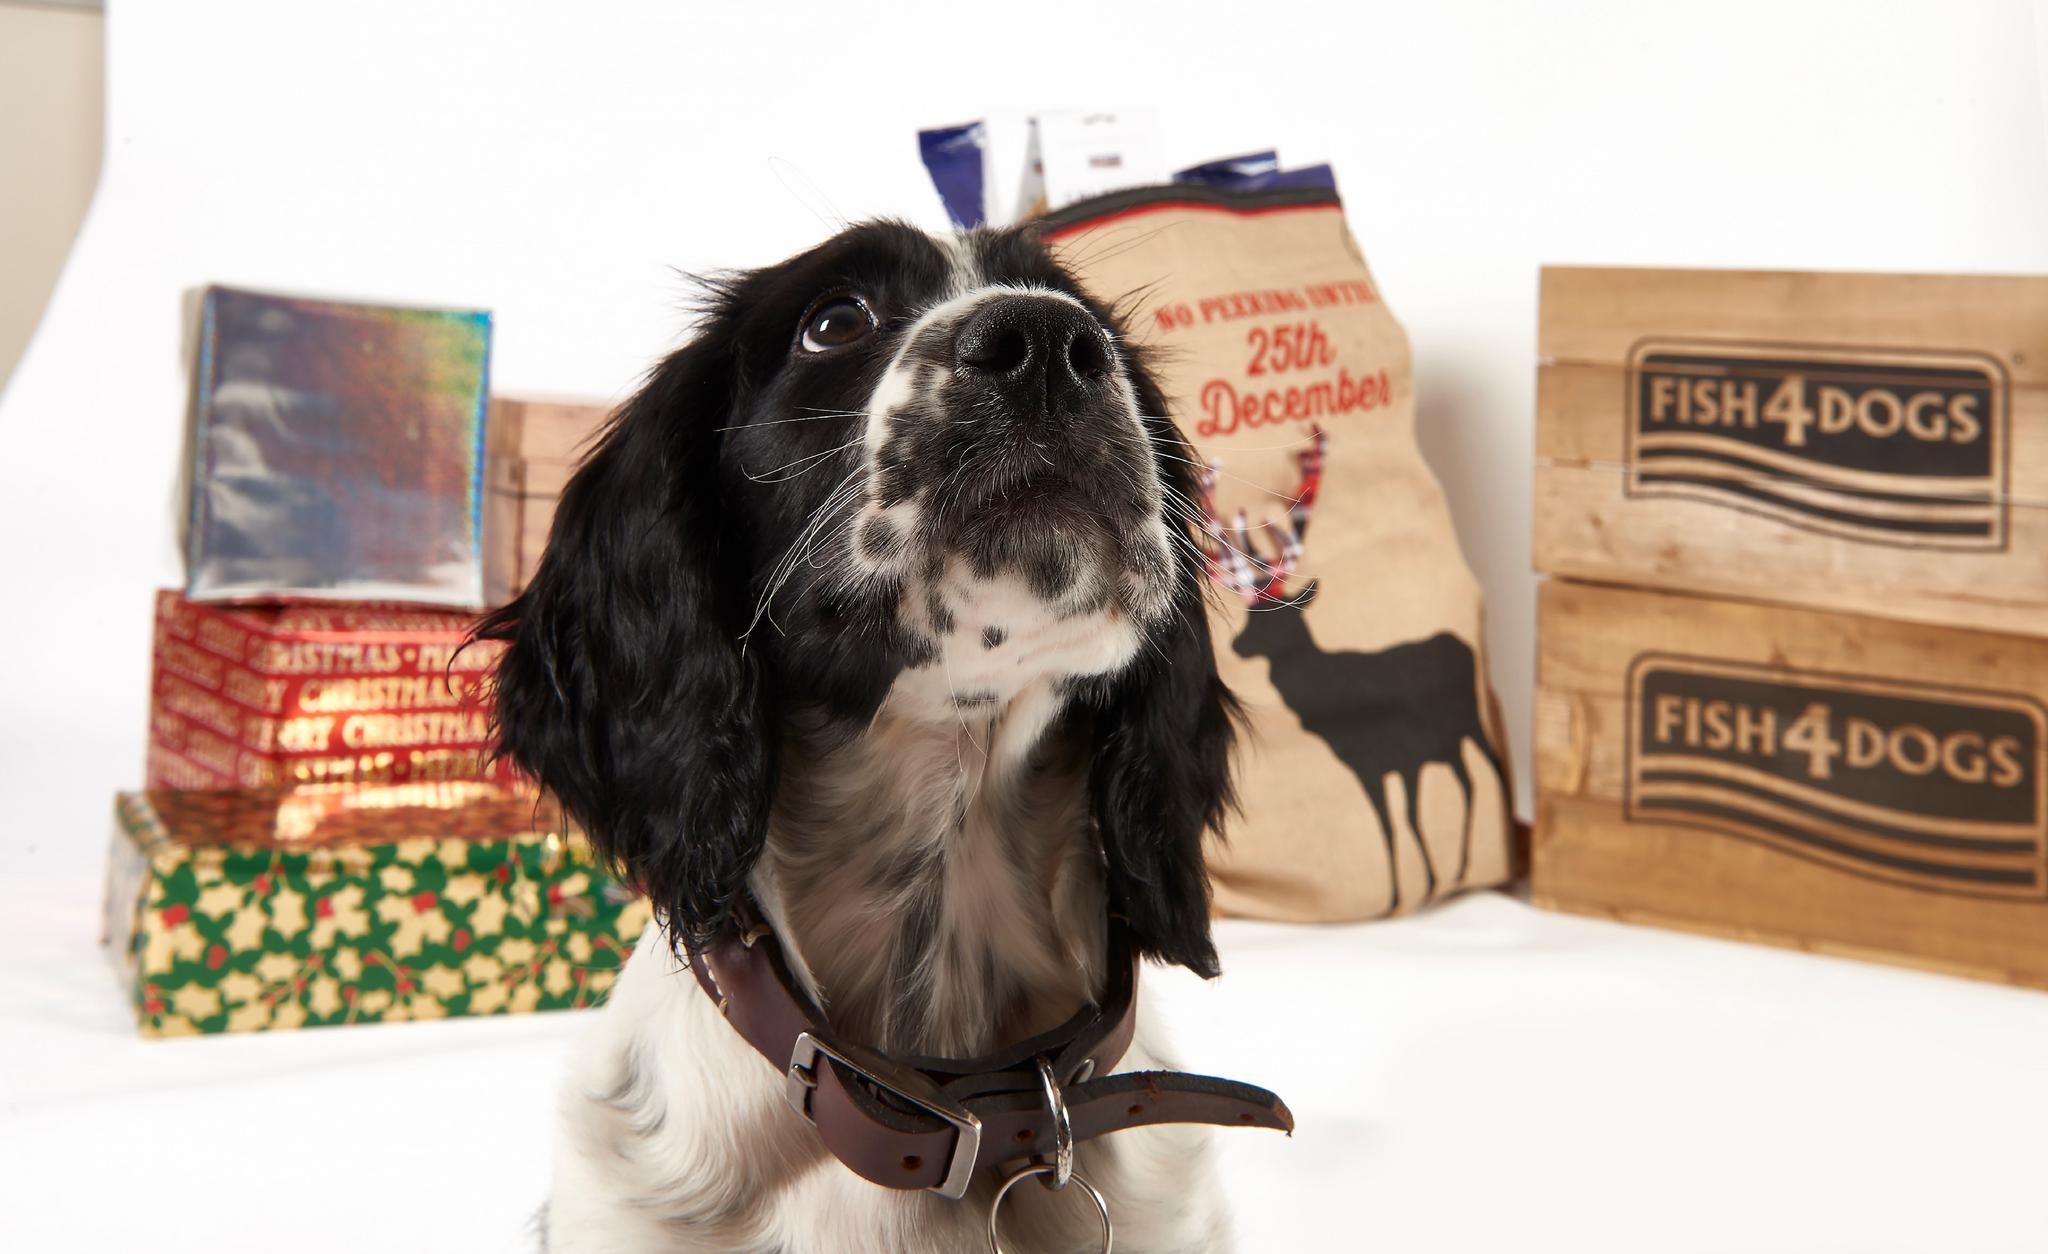 Firm favourite – Jasper counting down the days ‘til Christmas